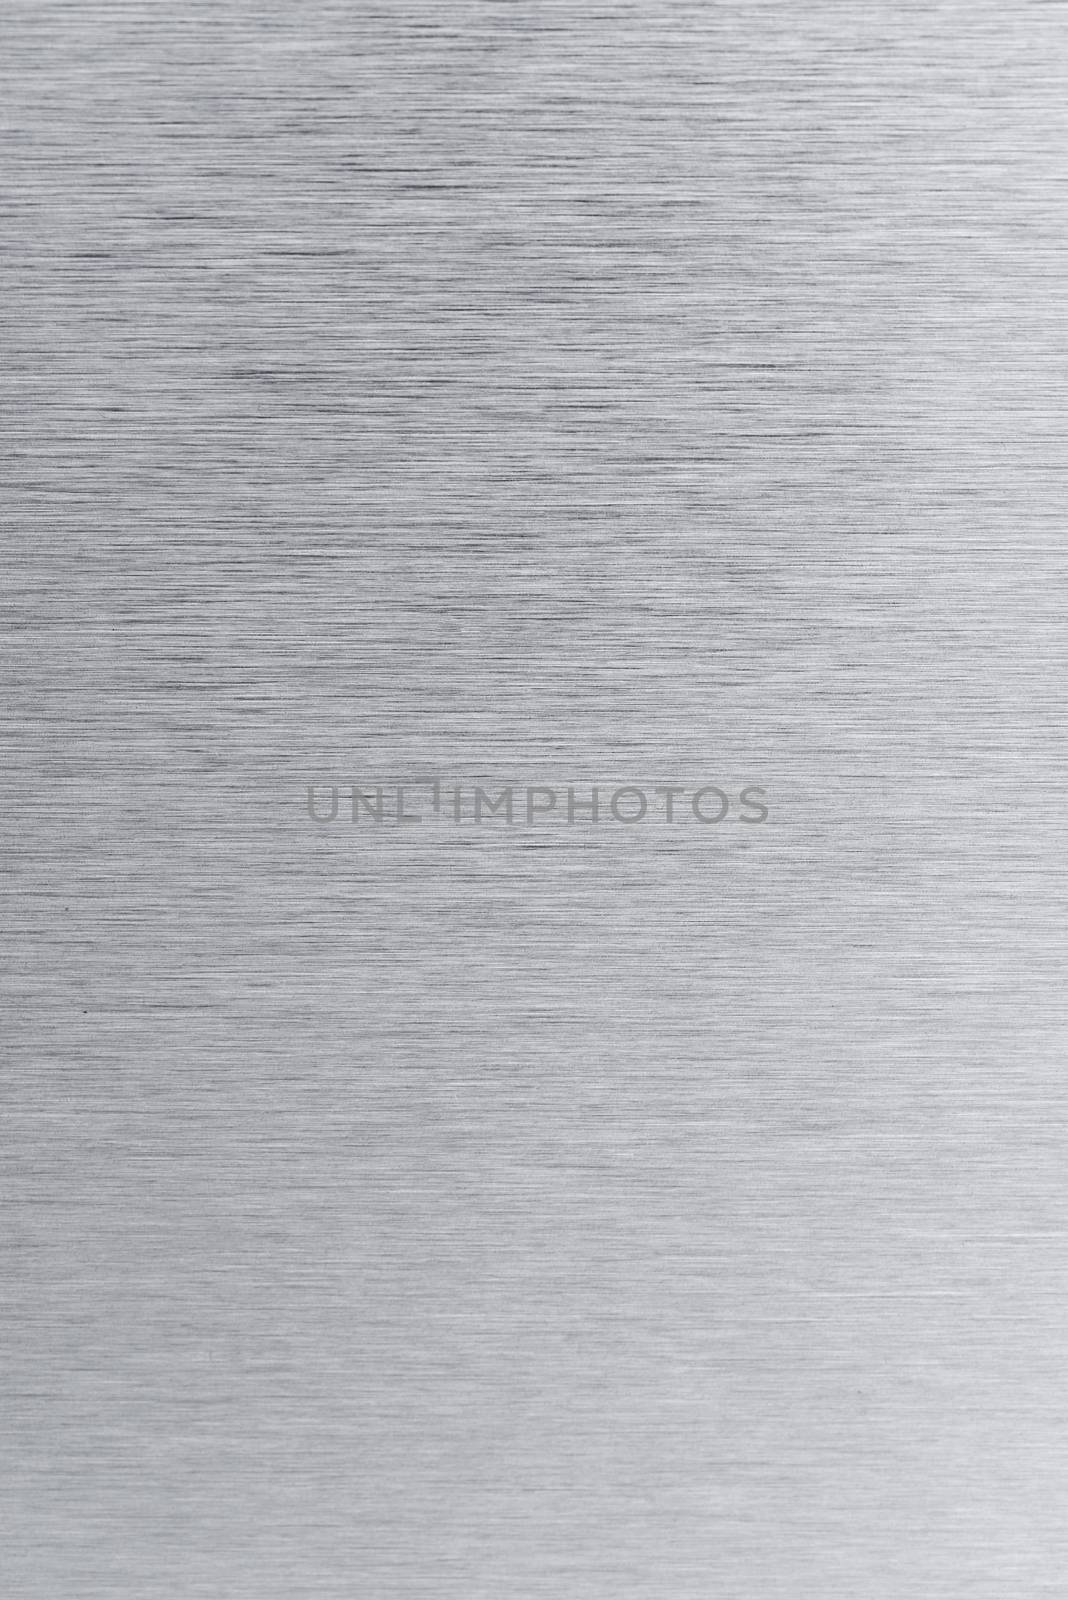 Grey stainless steel texture background.